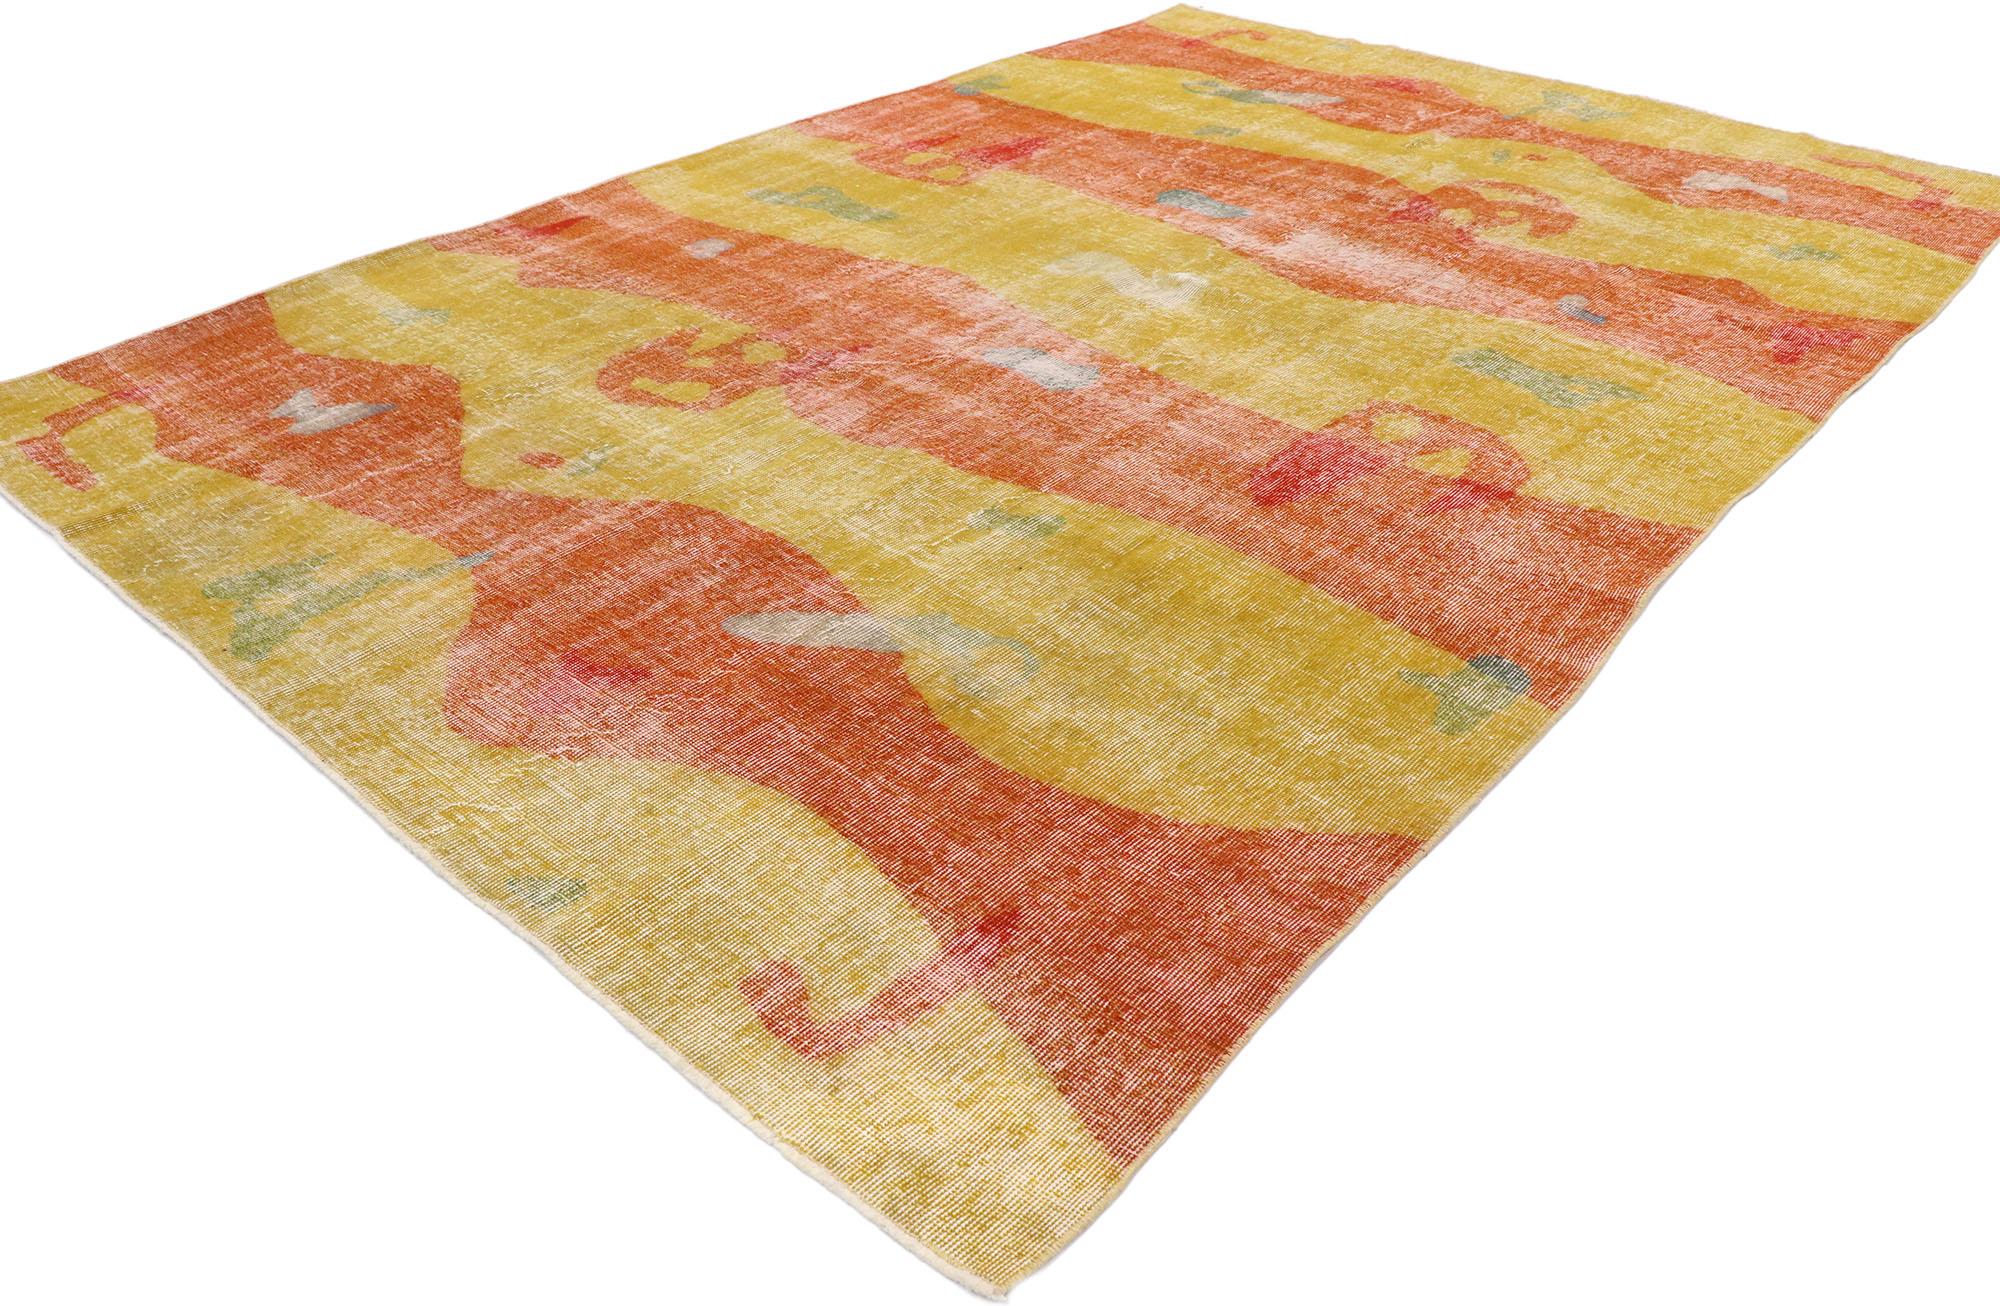 53287 Zeki Muren distressed vintage Turkish Sivas rug with abstract expressionist style. With its geometric pattern, bold form and vibrant colors, this hand knotted wool distressed vintage Turkish Sivas rug beautifully embodies Abstract